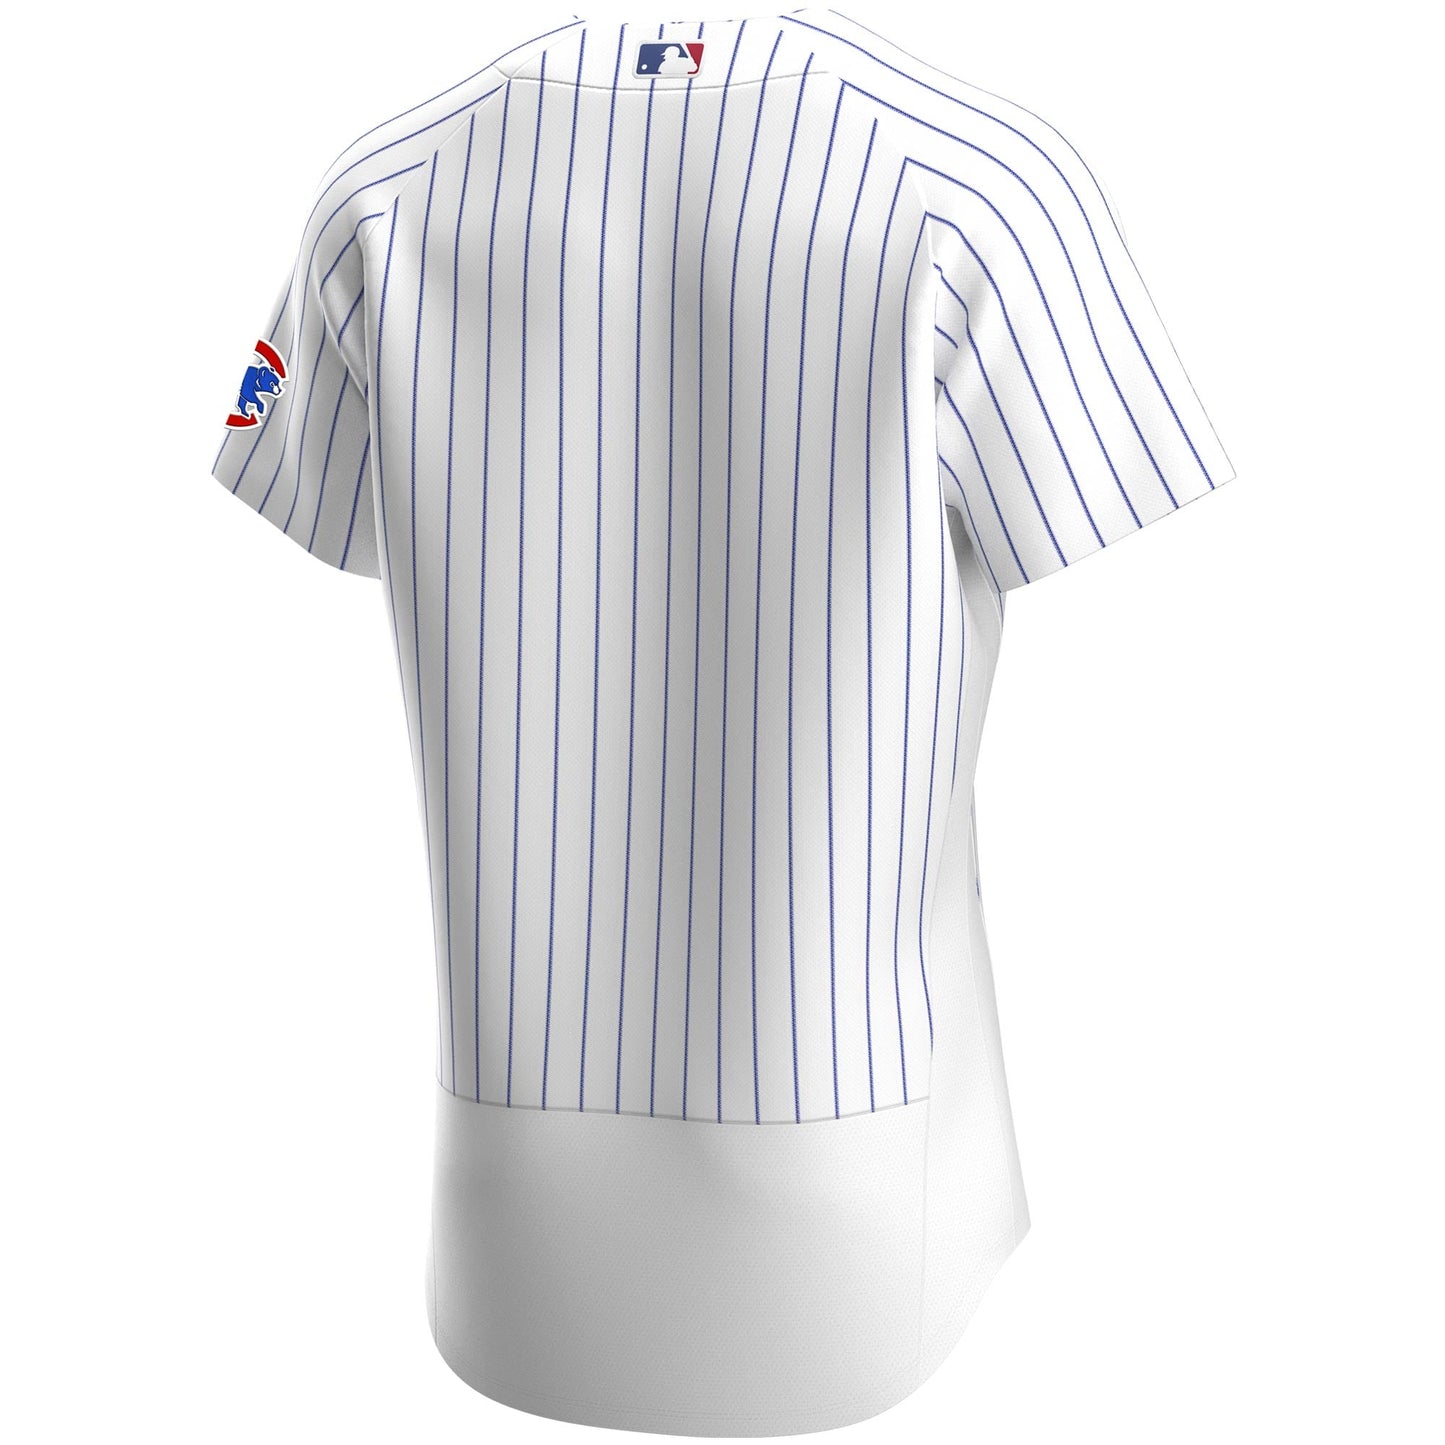 Chicago Cubs Nike Men's Home Pinstripe Authentic Jersey